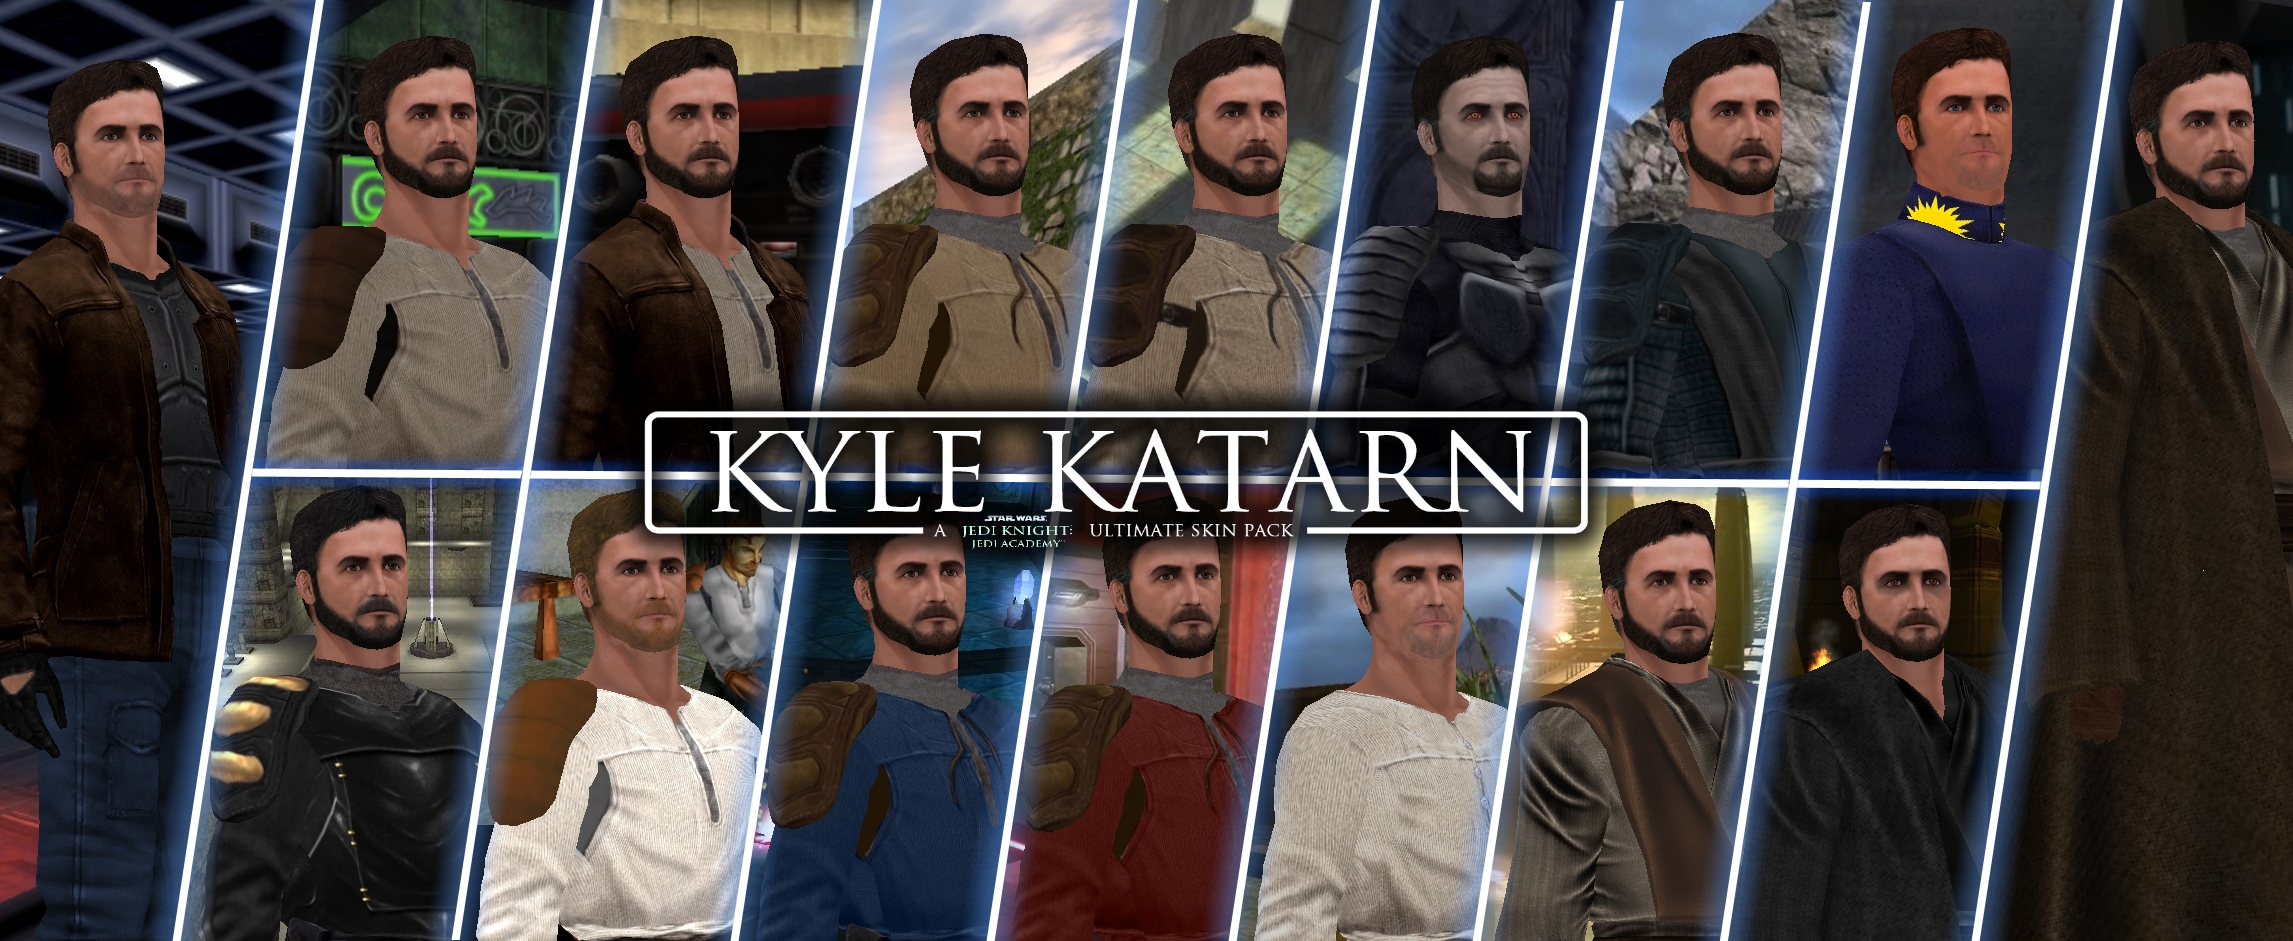 More information about "KYLE KATARN ULTIMATE PACK"